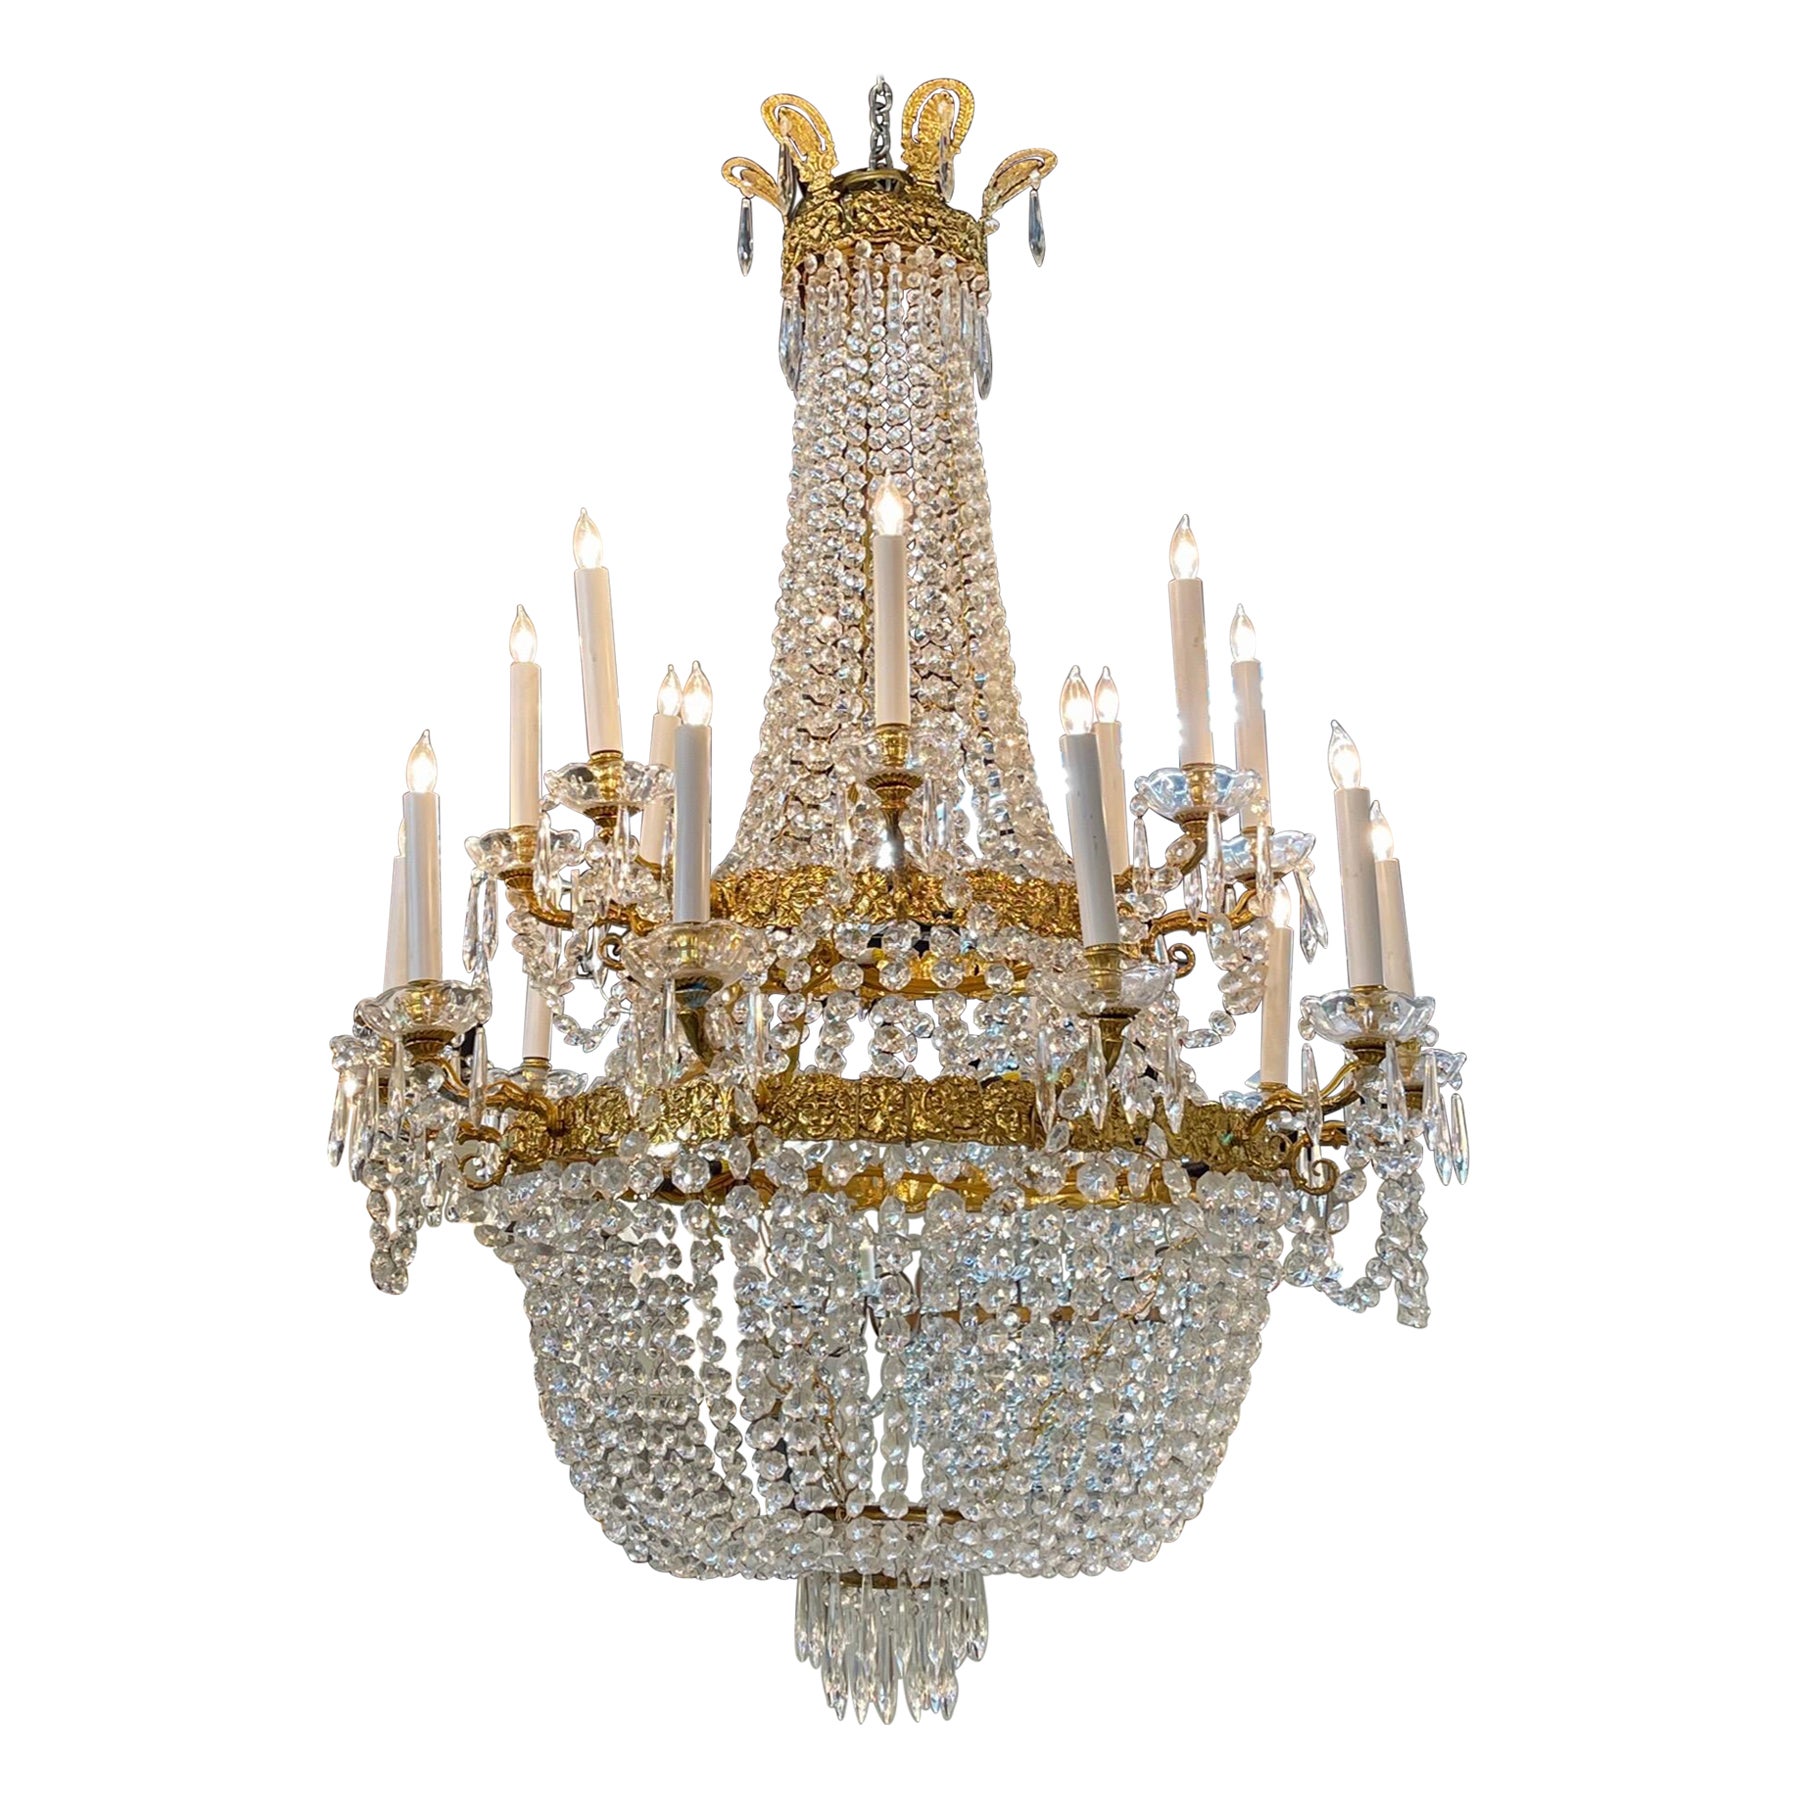 French Empire Style Gilt Bronze and Crystal Chandelier with 18 Lights